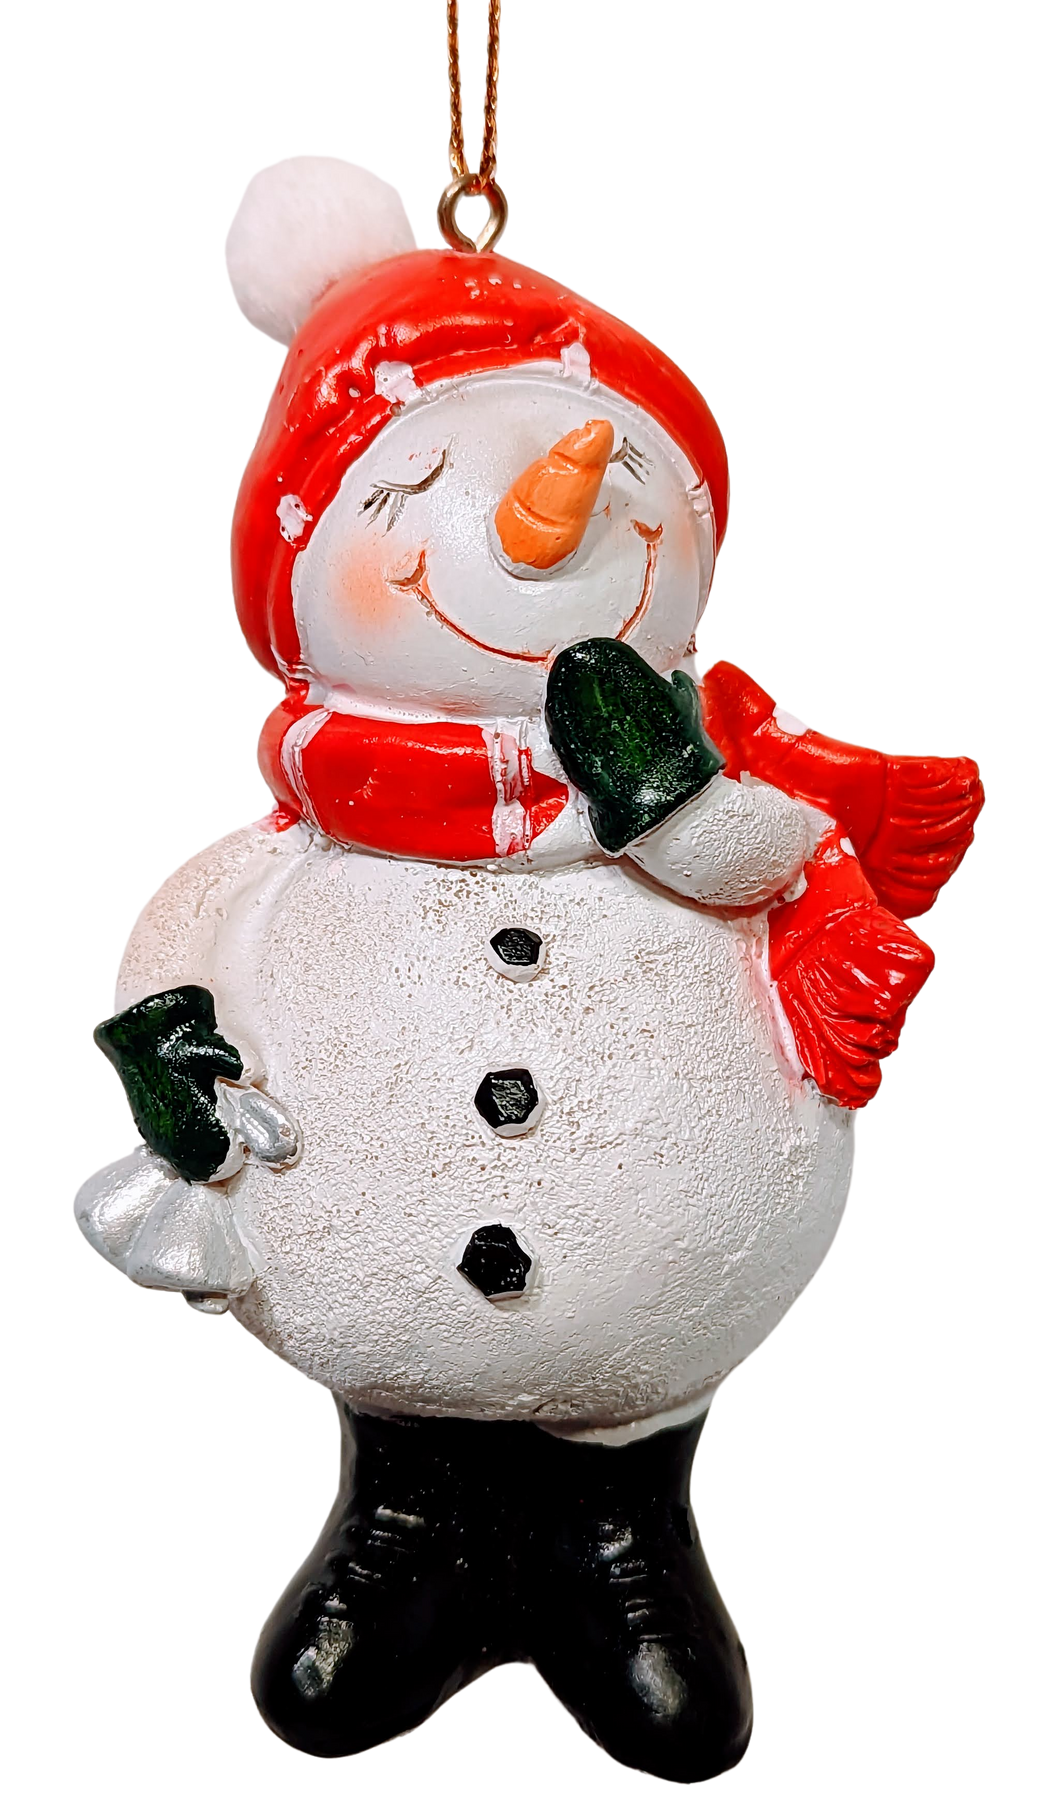 Snowman Ornament with Red Hat/Red Scarf Holding Silver Bells